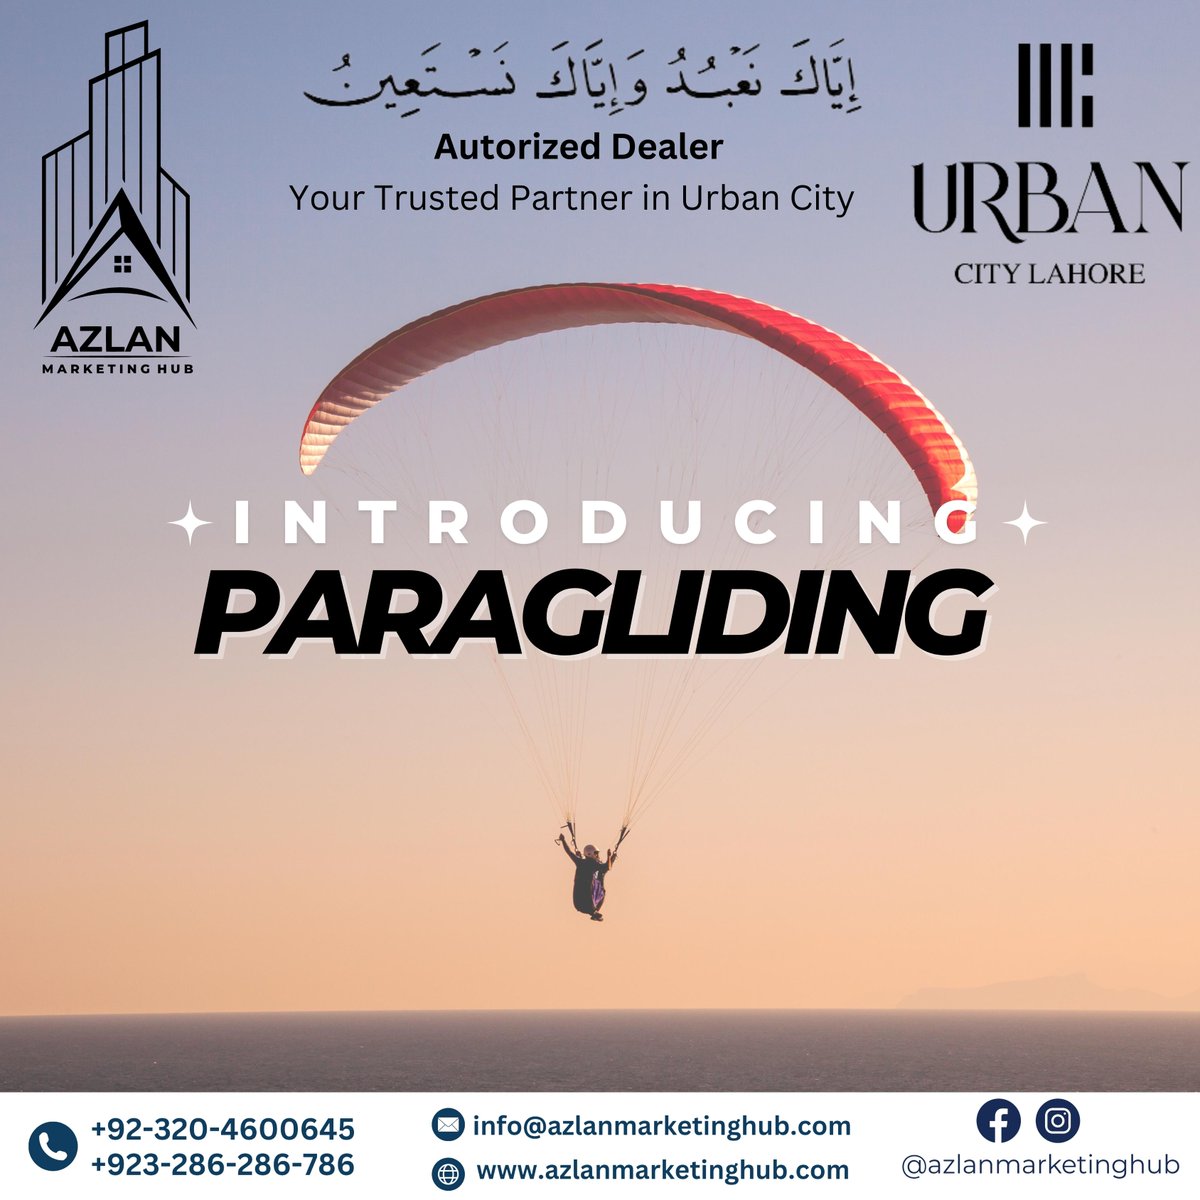 Introducing Urban City's exhilarating Paragliding experience! Azlan Marketing Hub, your trusted partner in finding your dream property. 🪂🌇💼 #Paragliding #UrbanCity #PropertyInvestment #DreamProperty #AdrenalineRush #ExploreUrbanCity #ThrillingExperience #AzlanMarketingHub